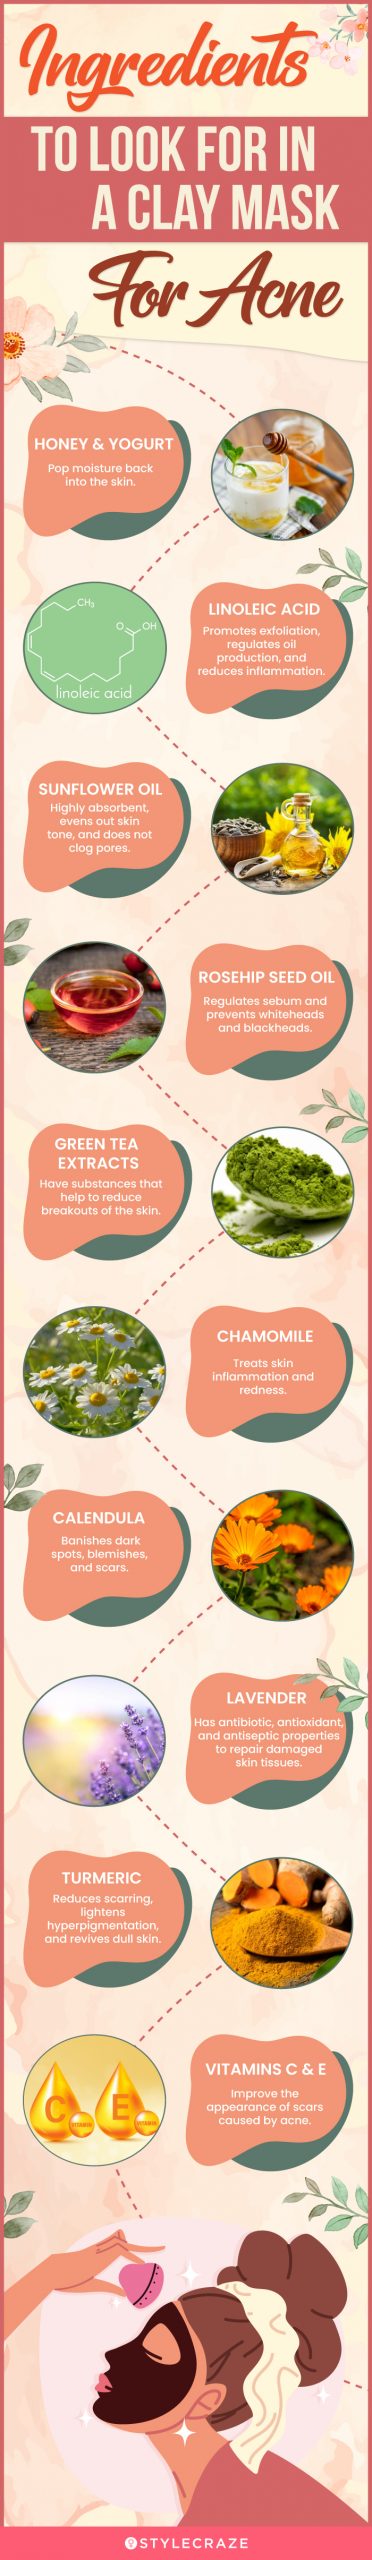 Ingredients To Look For In A Clay Mask For Acne (infographic)